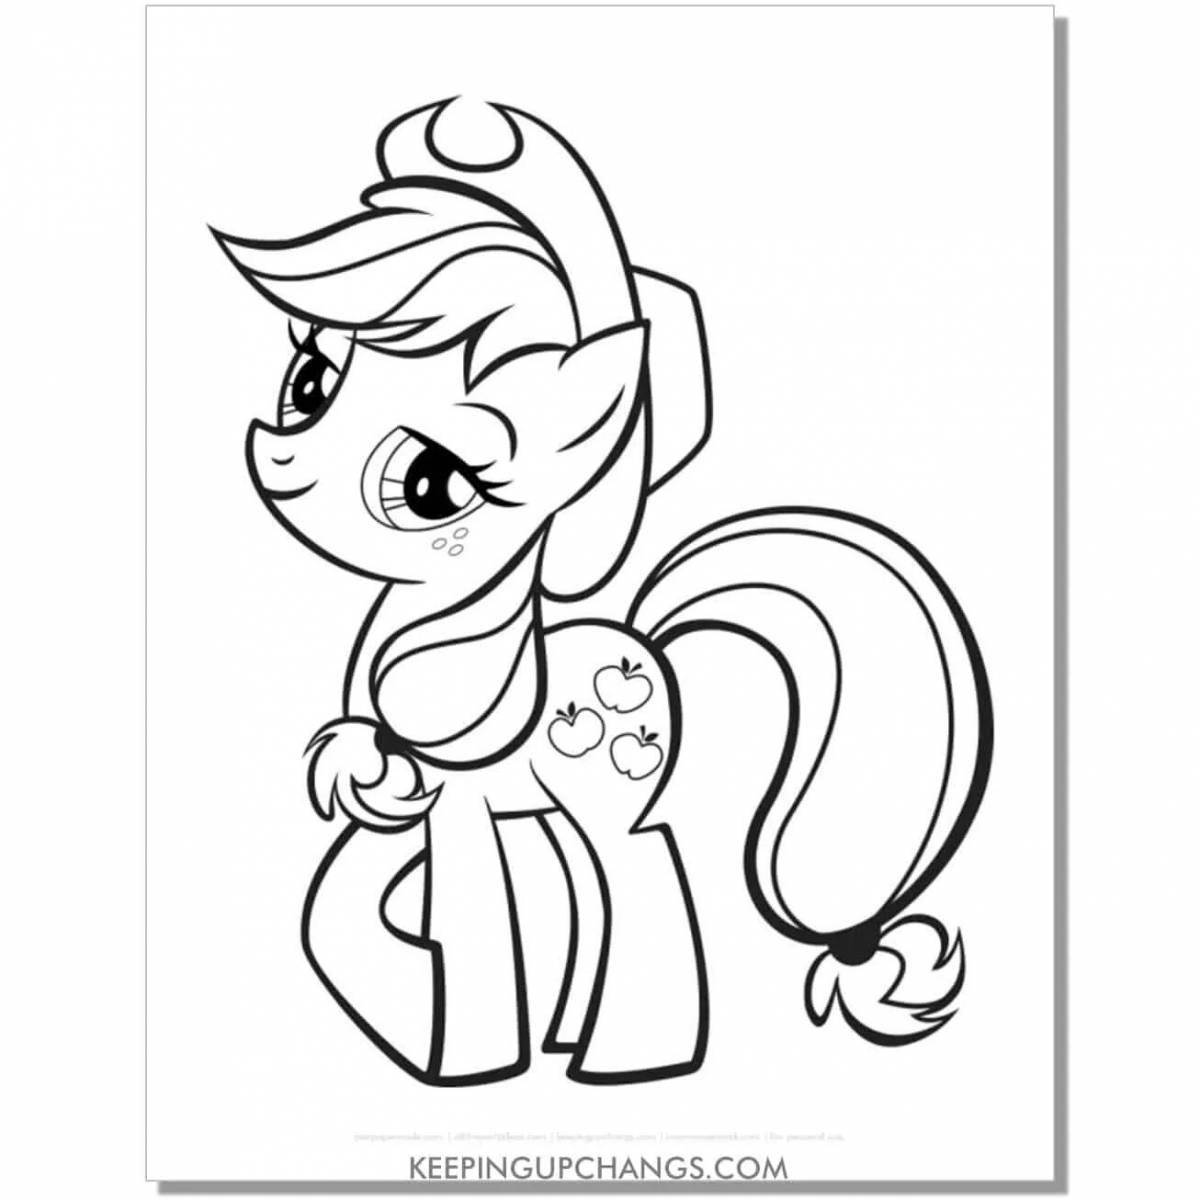 Creative pony coloring for 3-4 year olds